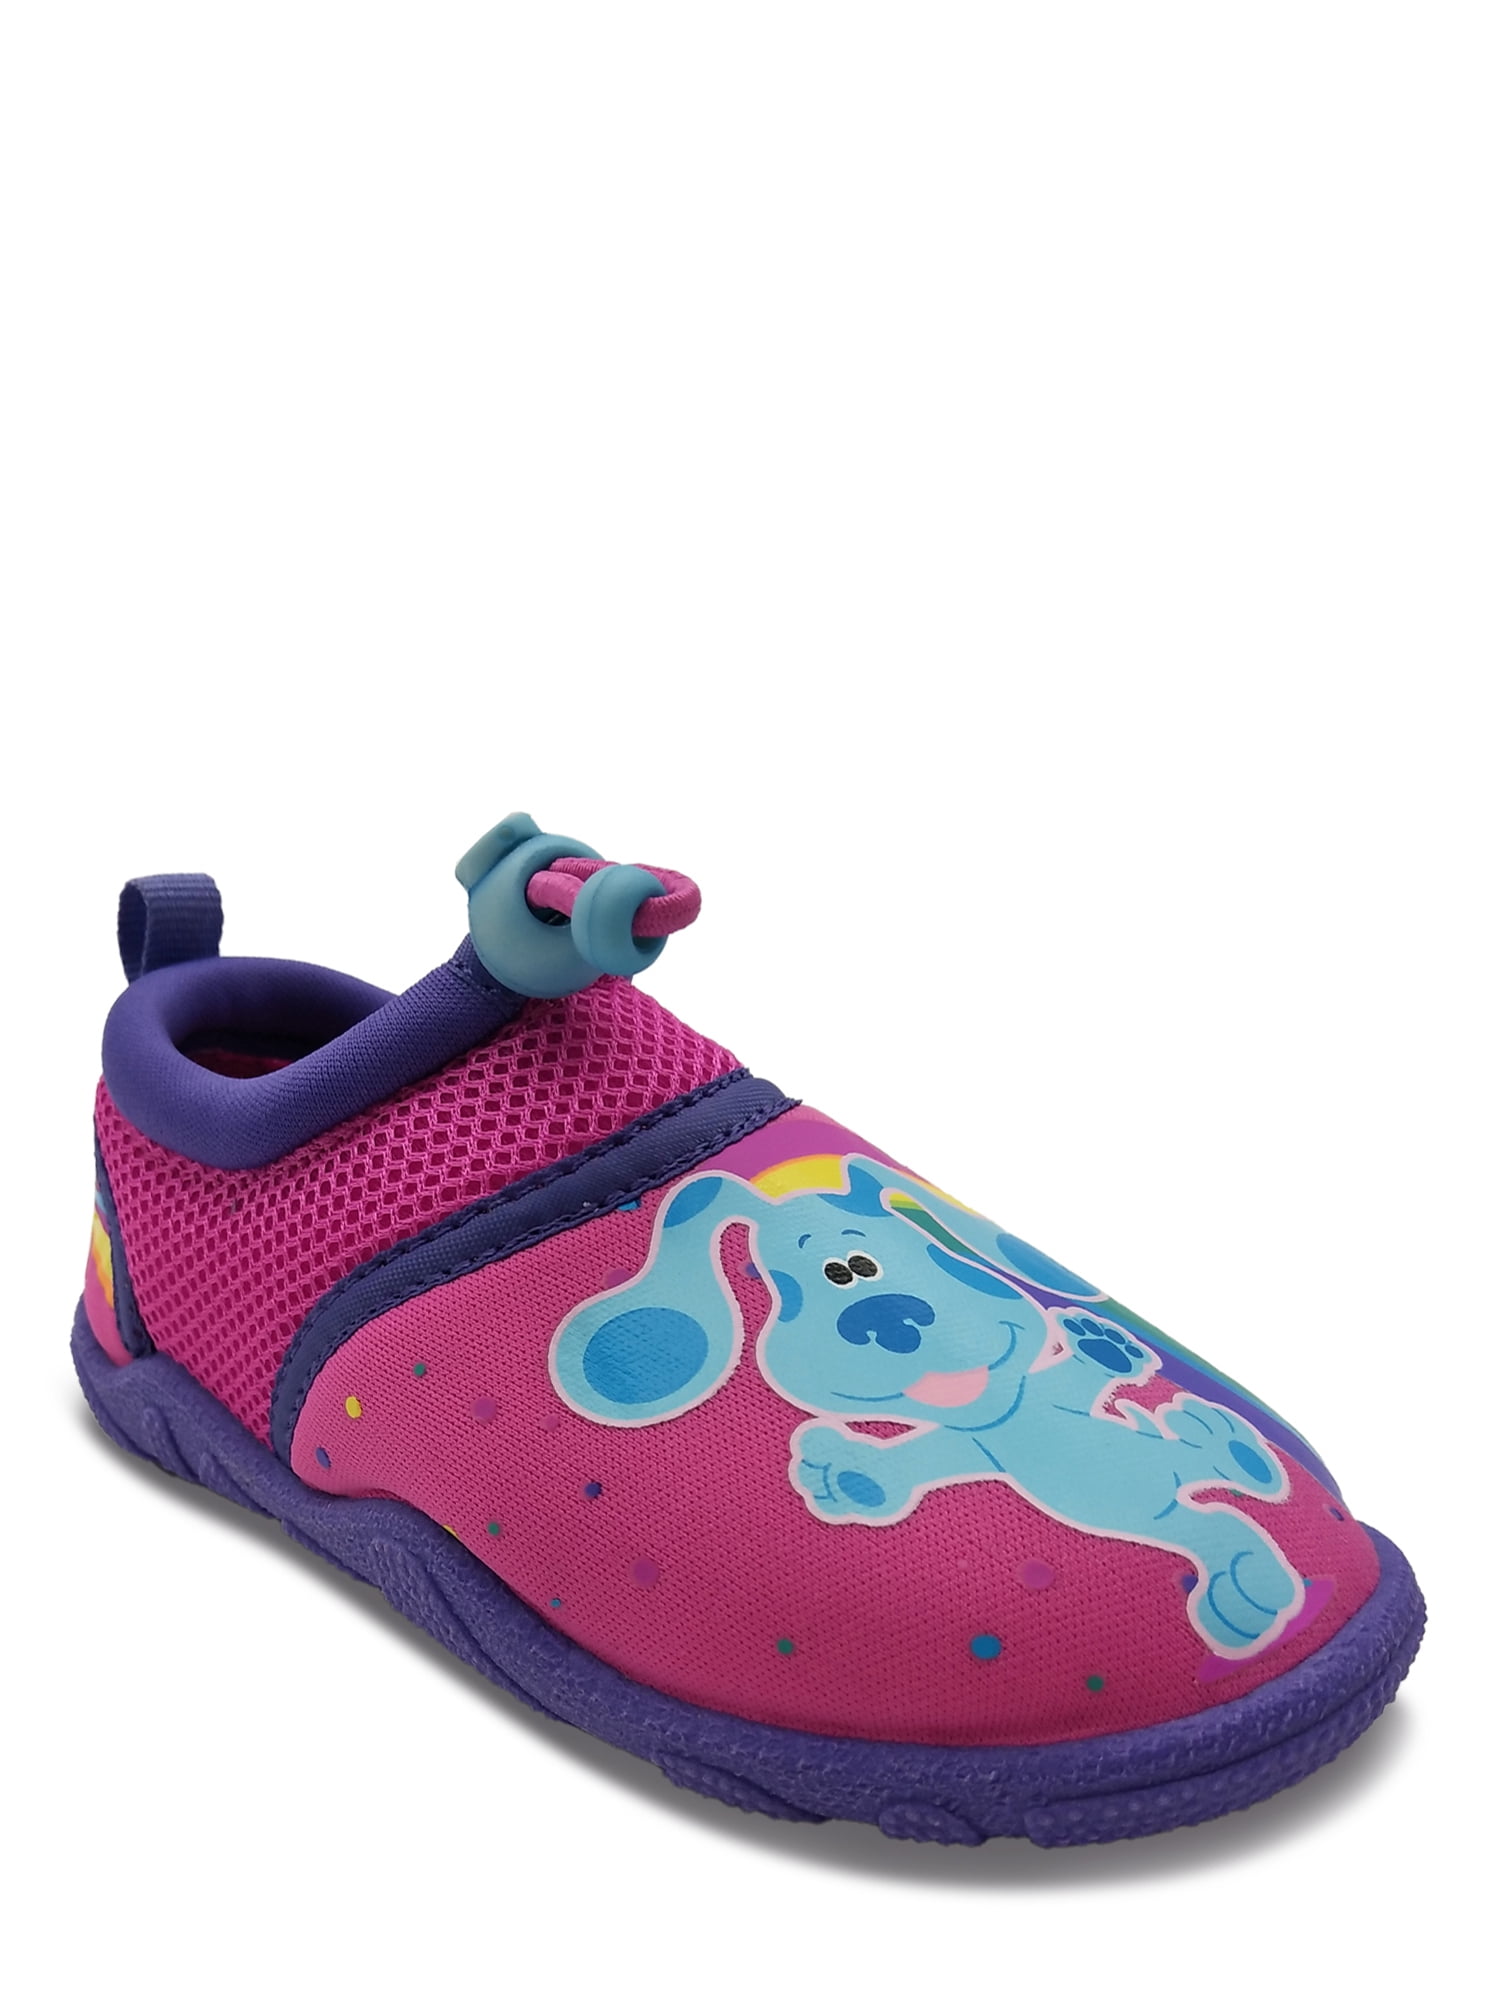 DINY Home & Style Girls Slip-On Water Shoes 